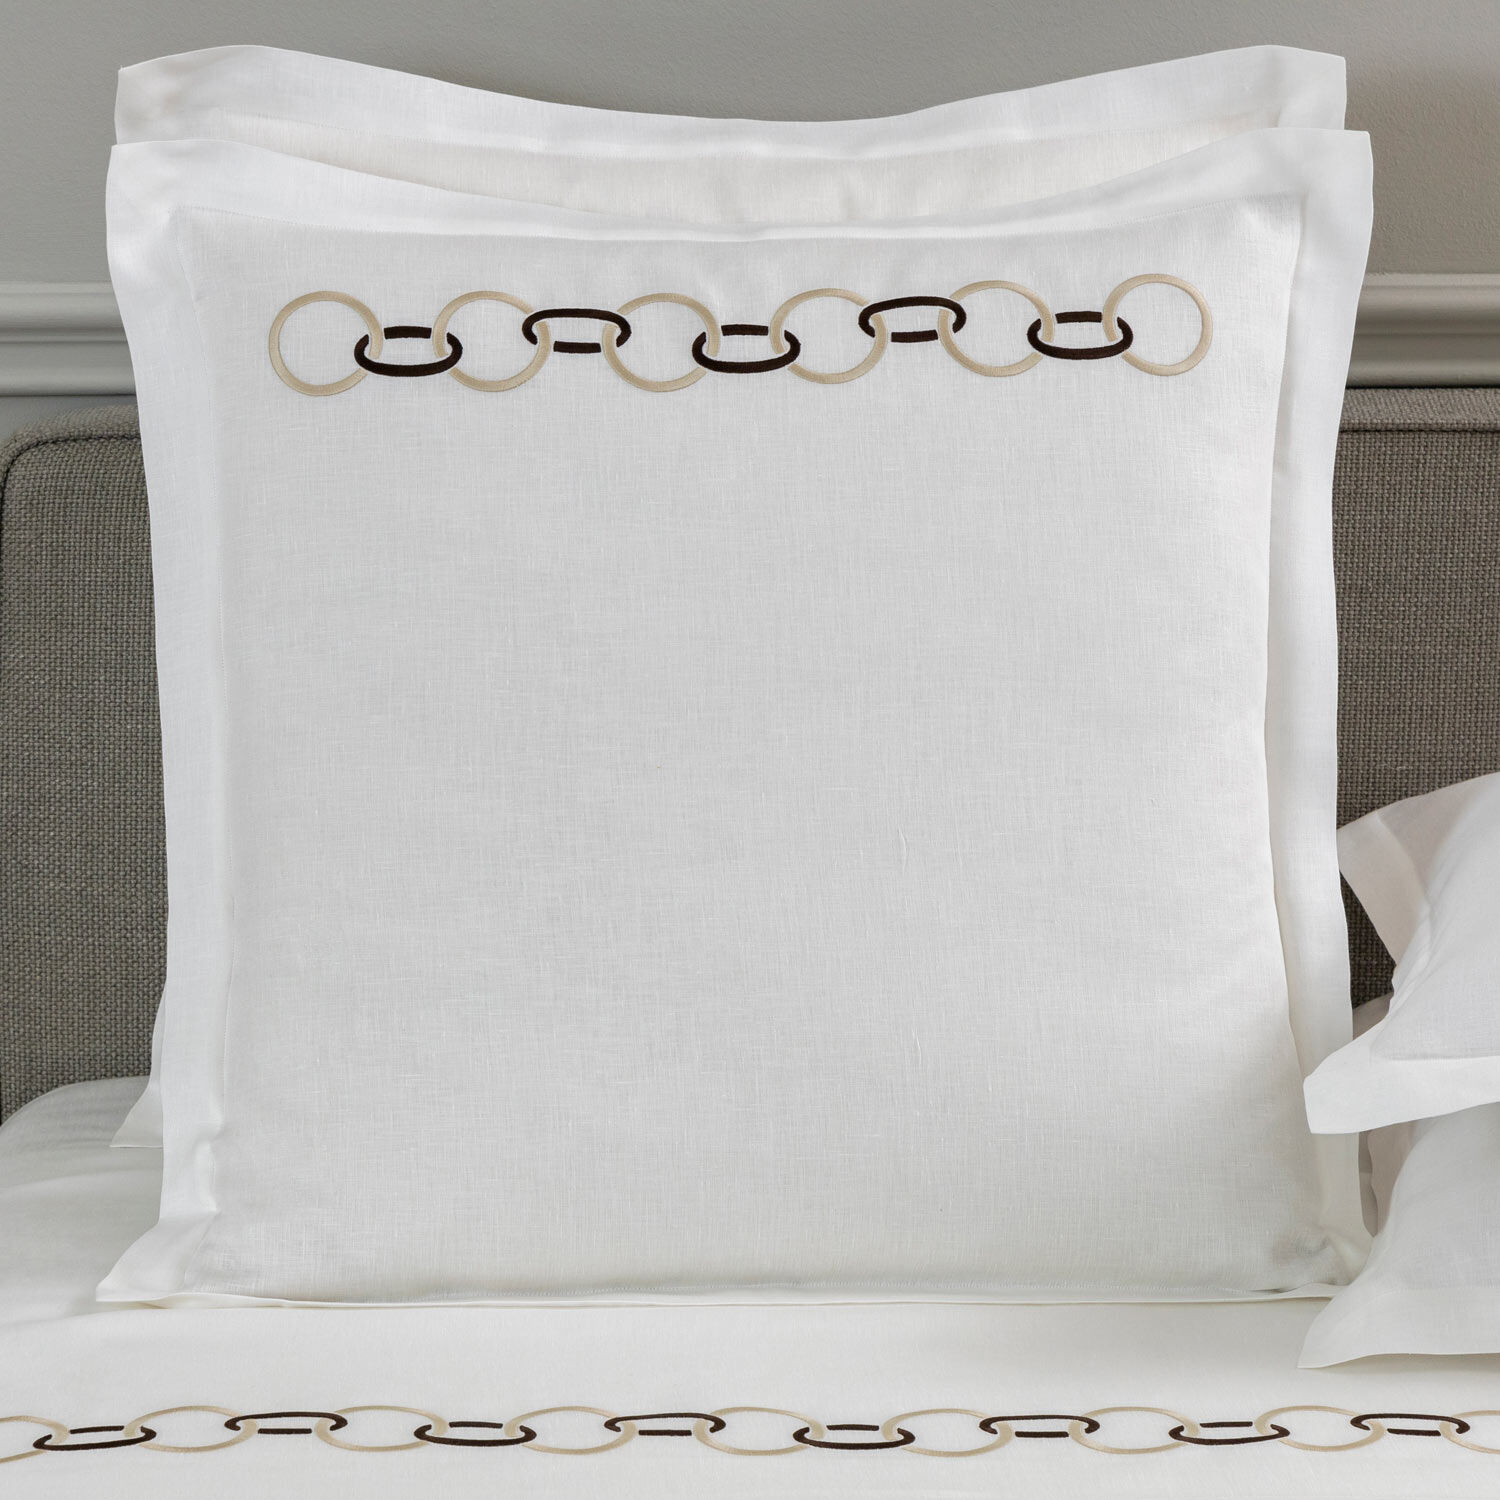 Details about   NEW Frette 3PC SET of EURO SHAMS Waves White Sea Taupe Sham Embroidered Sham 